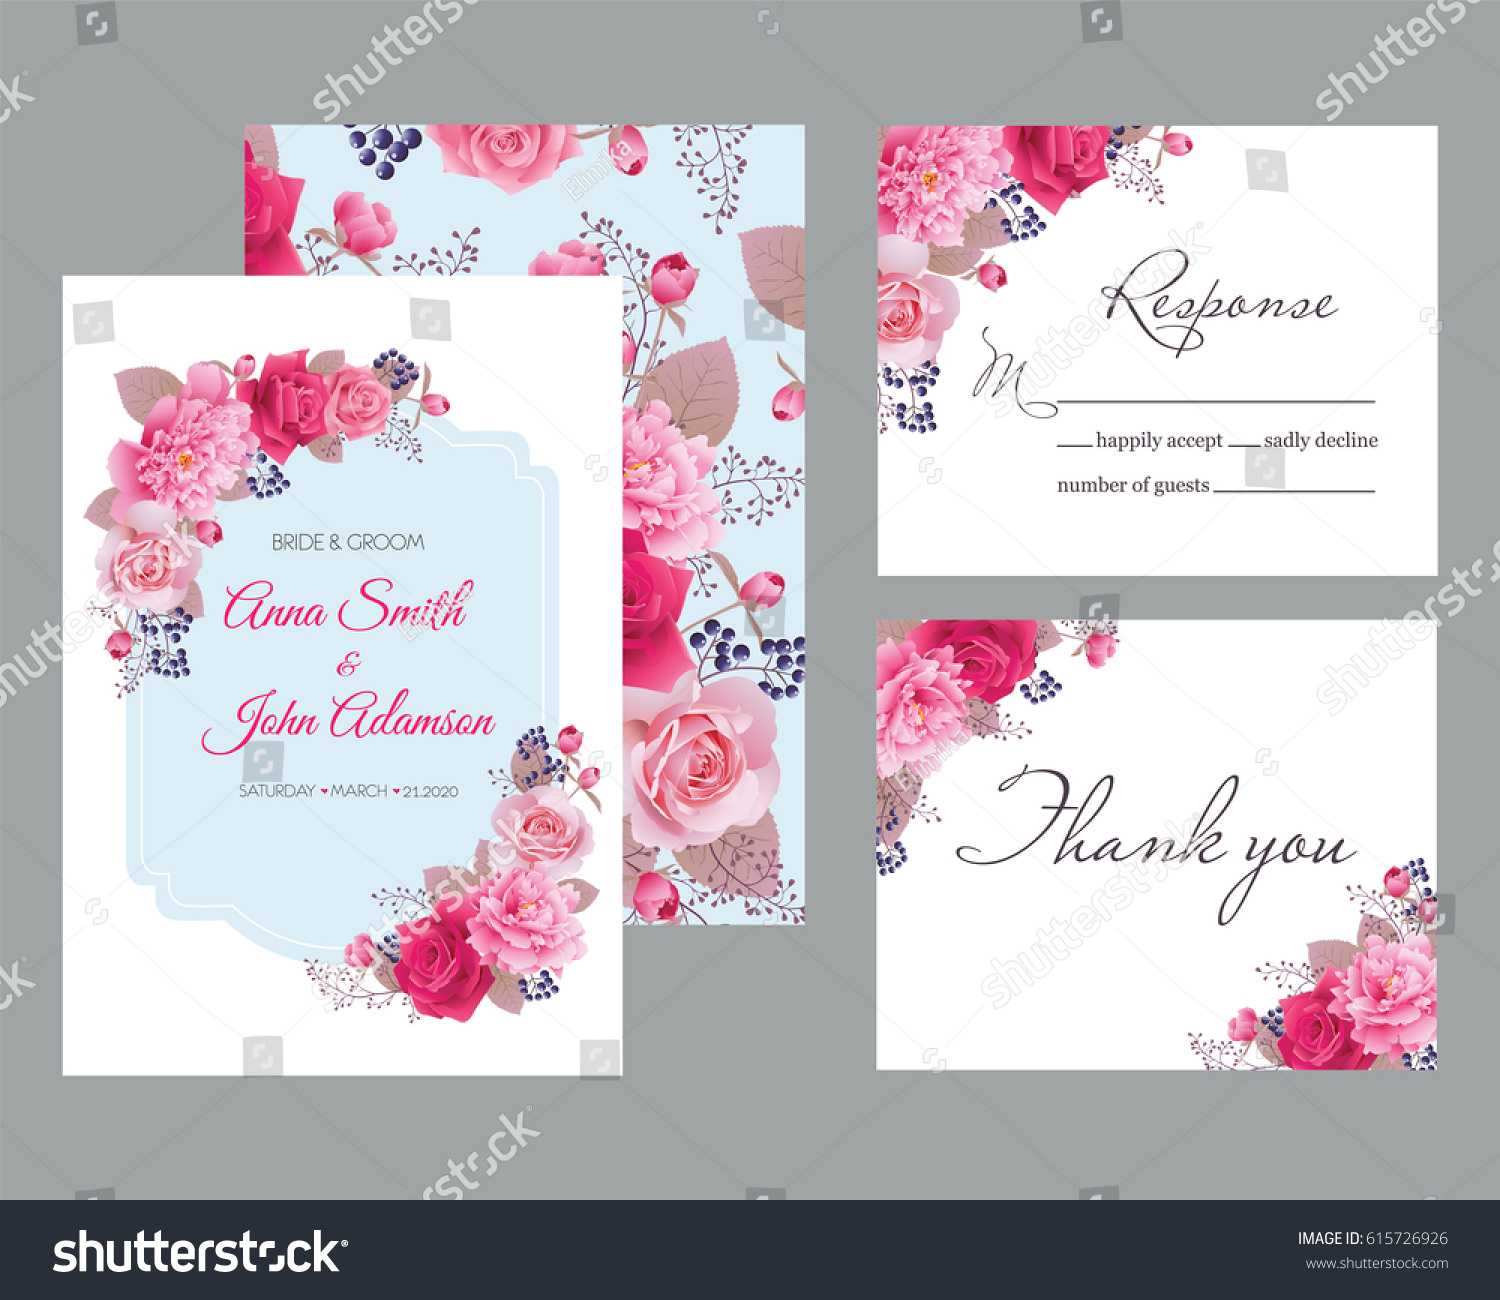 Wedding Acceptance Template Free ] – Wedding Invitations Within Acceptance Card Template